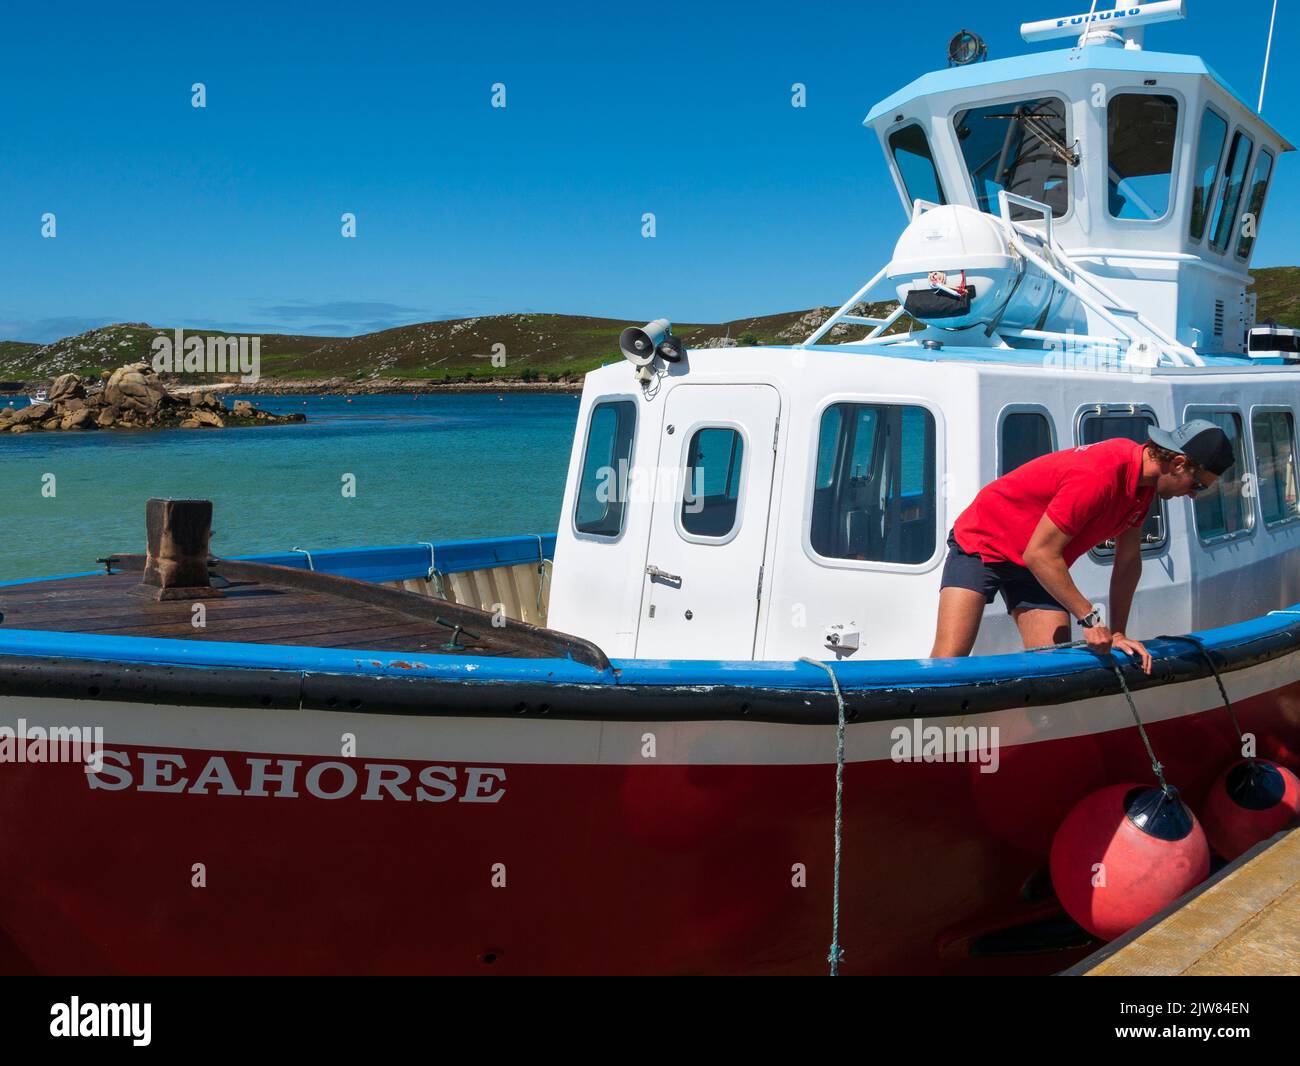 Boatman landing the Seahorse inter-island boat on the quay, Bryher, Isles of Scilly, Cornwall, England, UK. Stock Photo